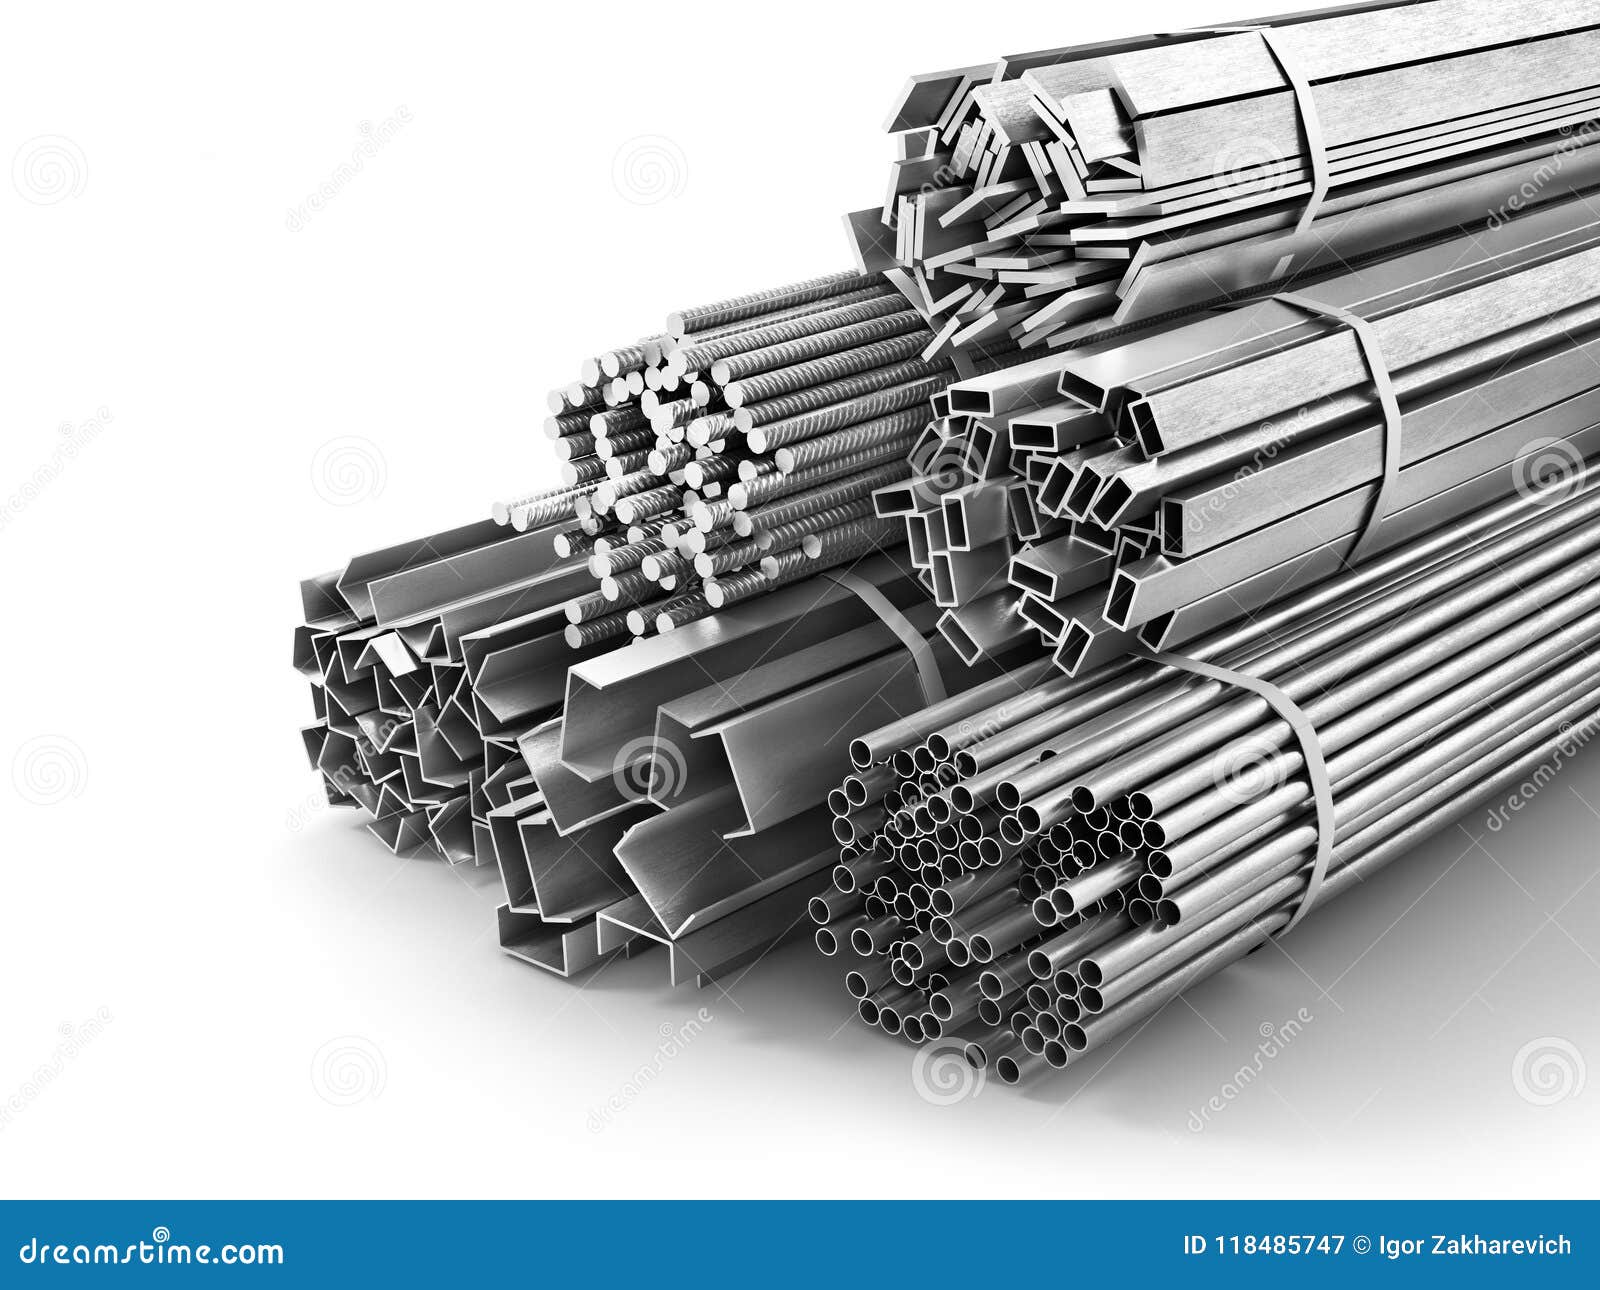 different metal products. metal profiles and tubes